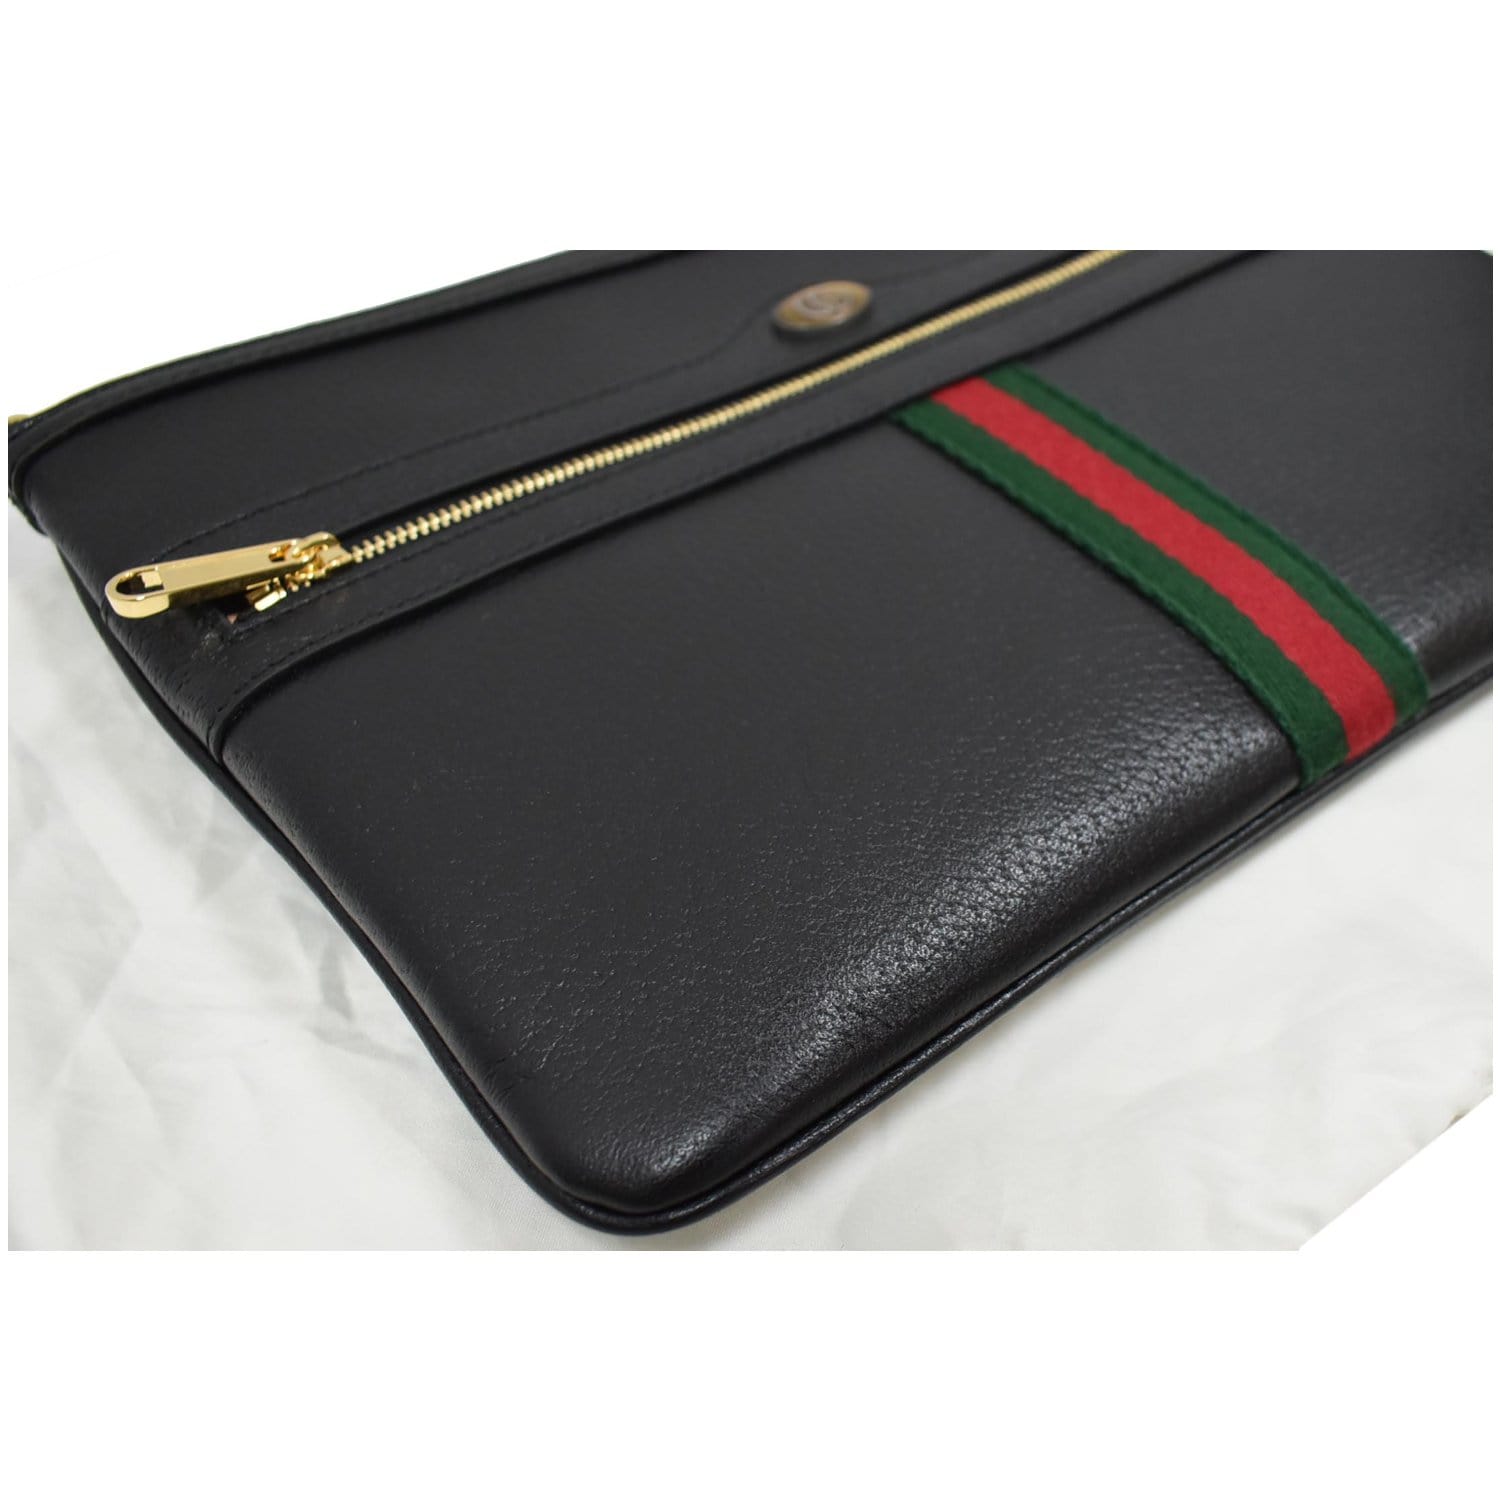 Gucci, Bags, New Gucci Calfskin Large Ophidia Pouch Clutch Black